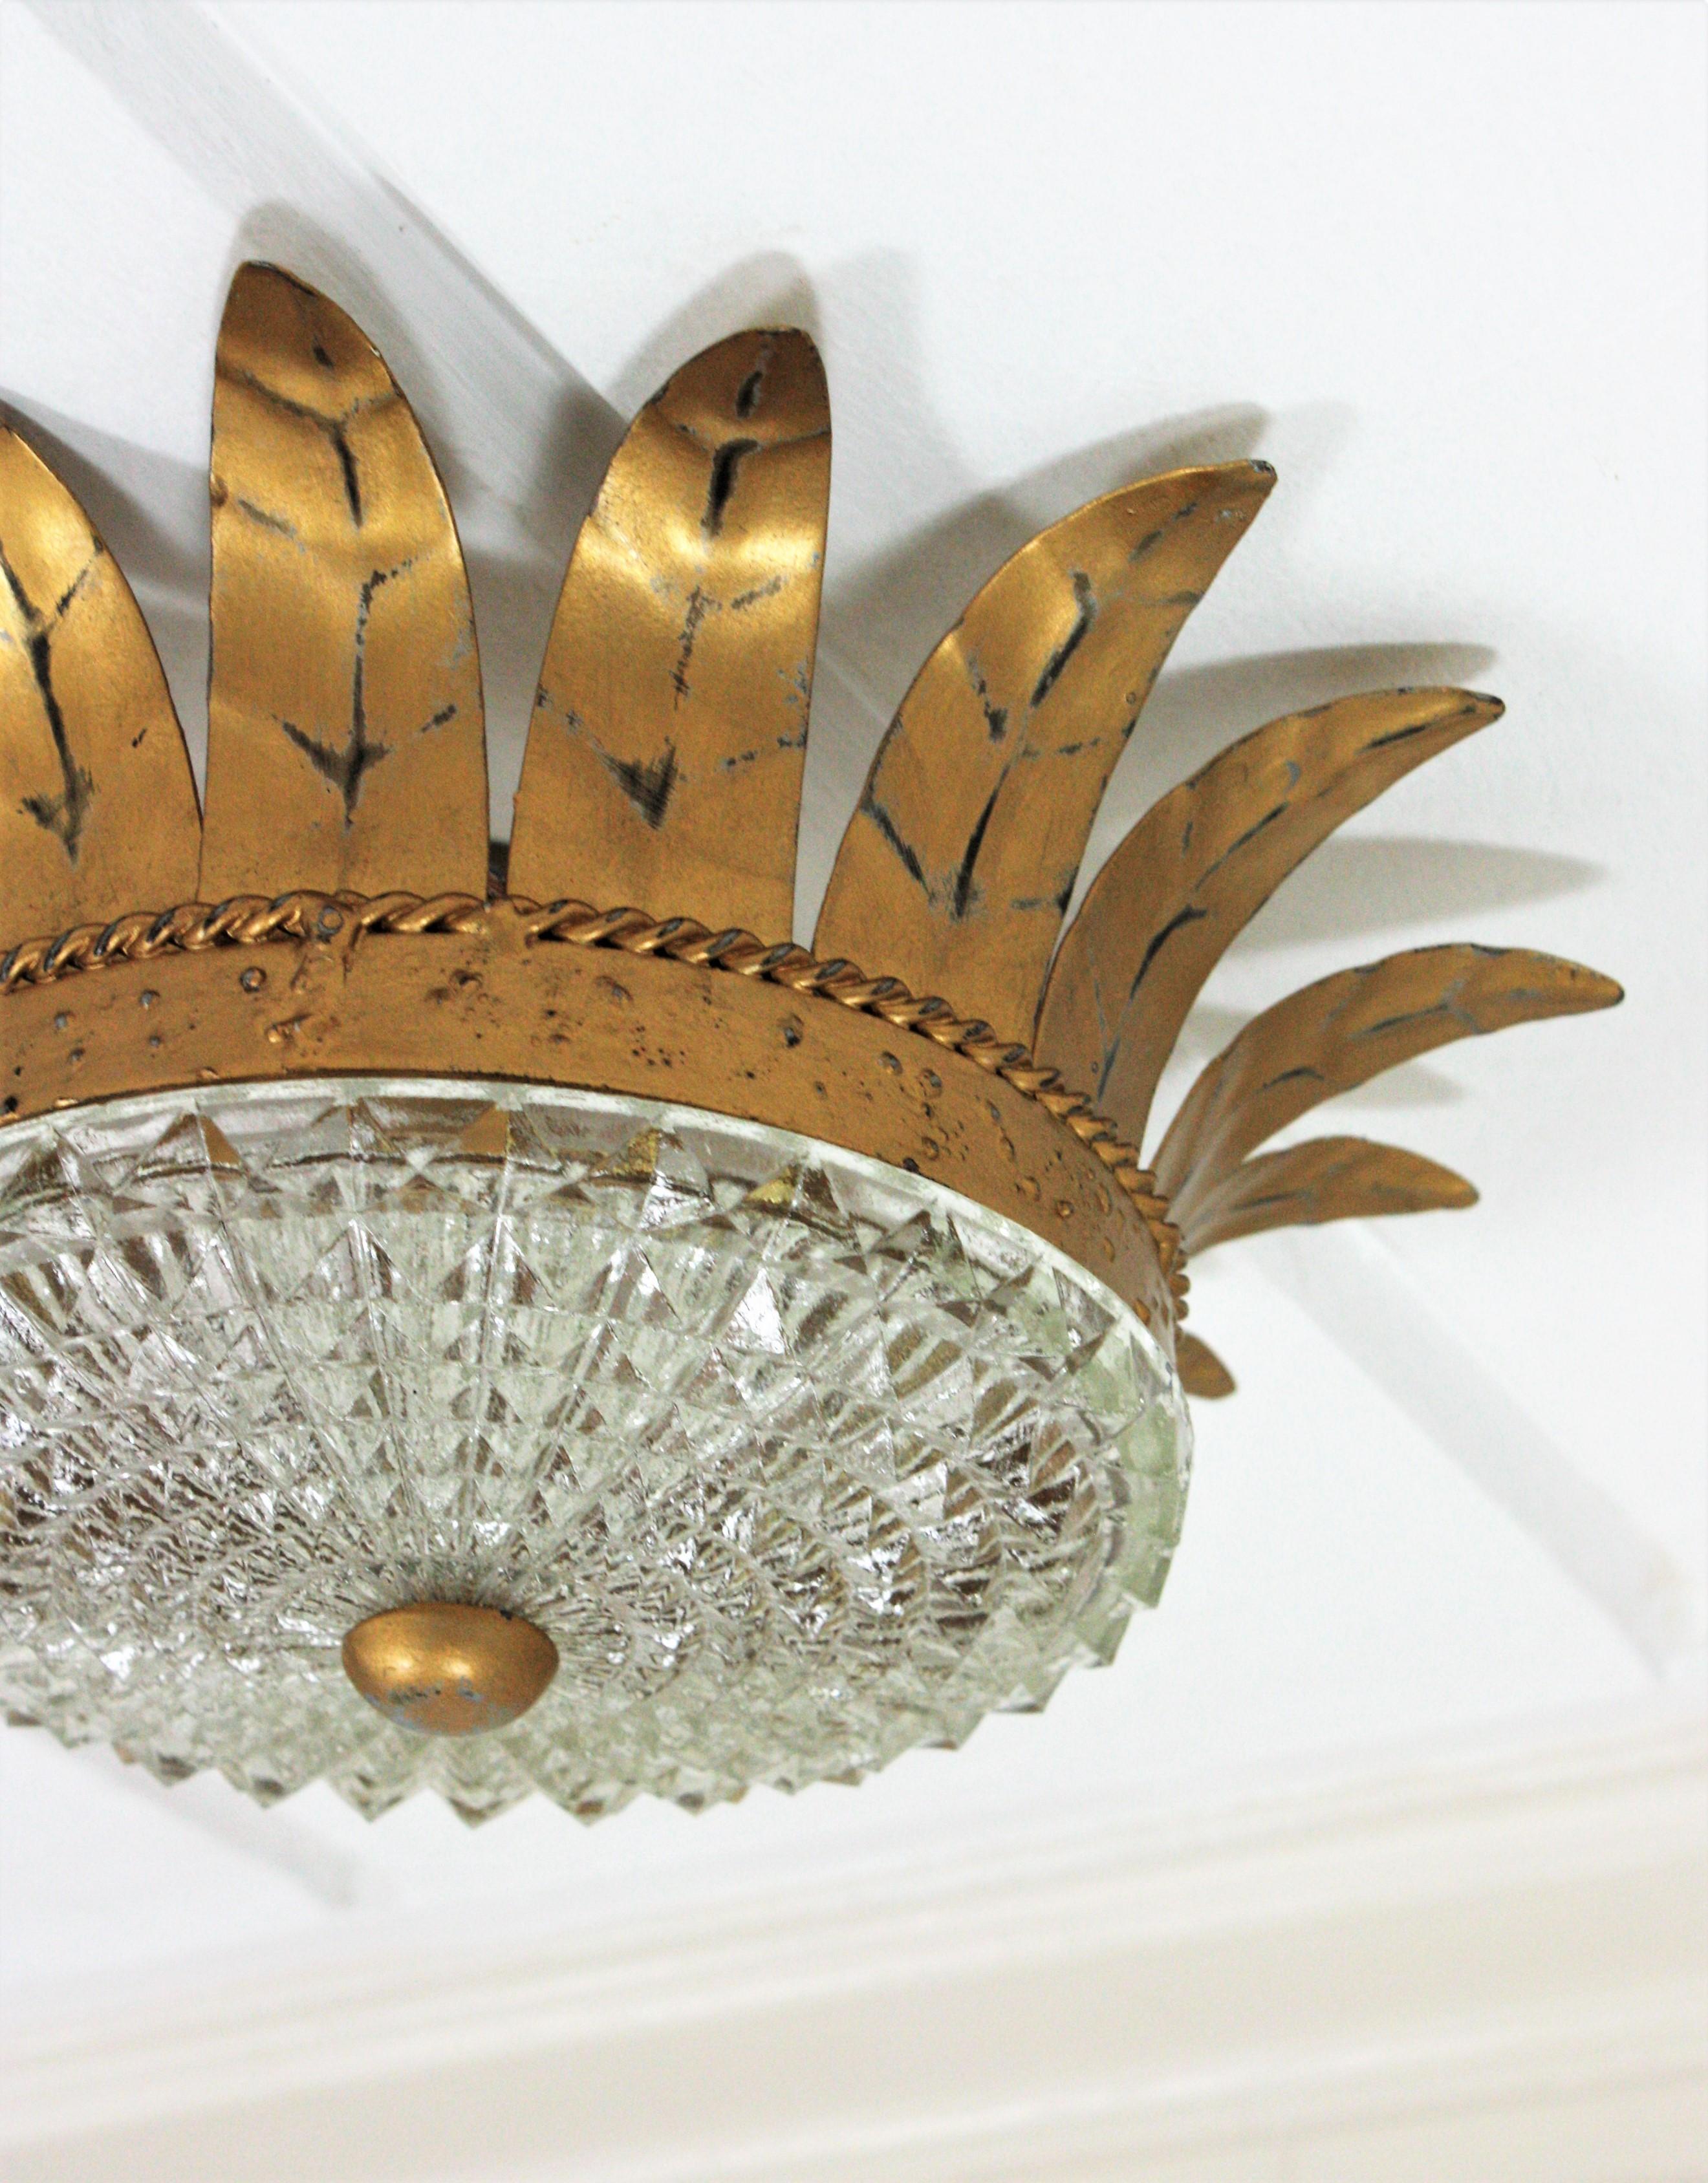 Sunburst Crown Light Fixture in Gilt Iron and Glass, 1950s For Sale 3